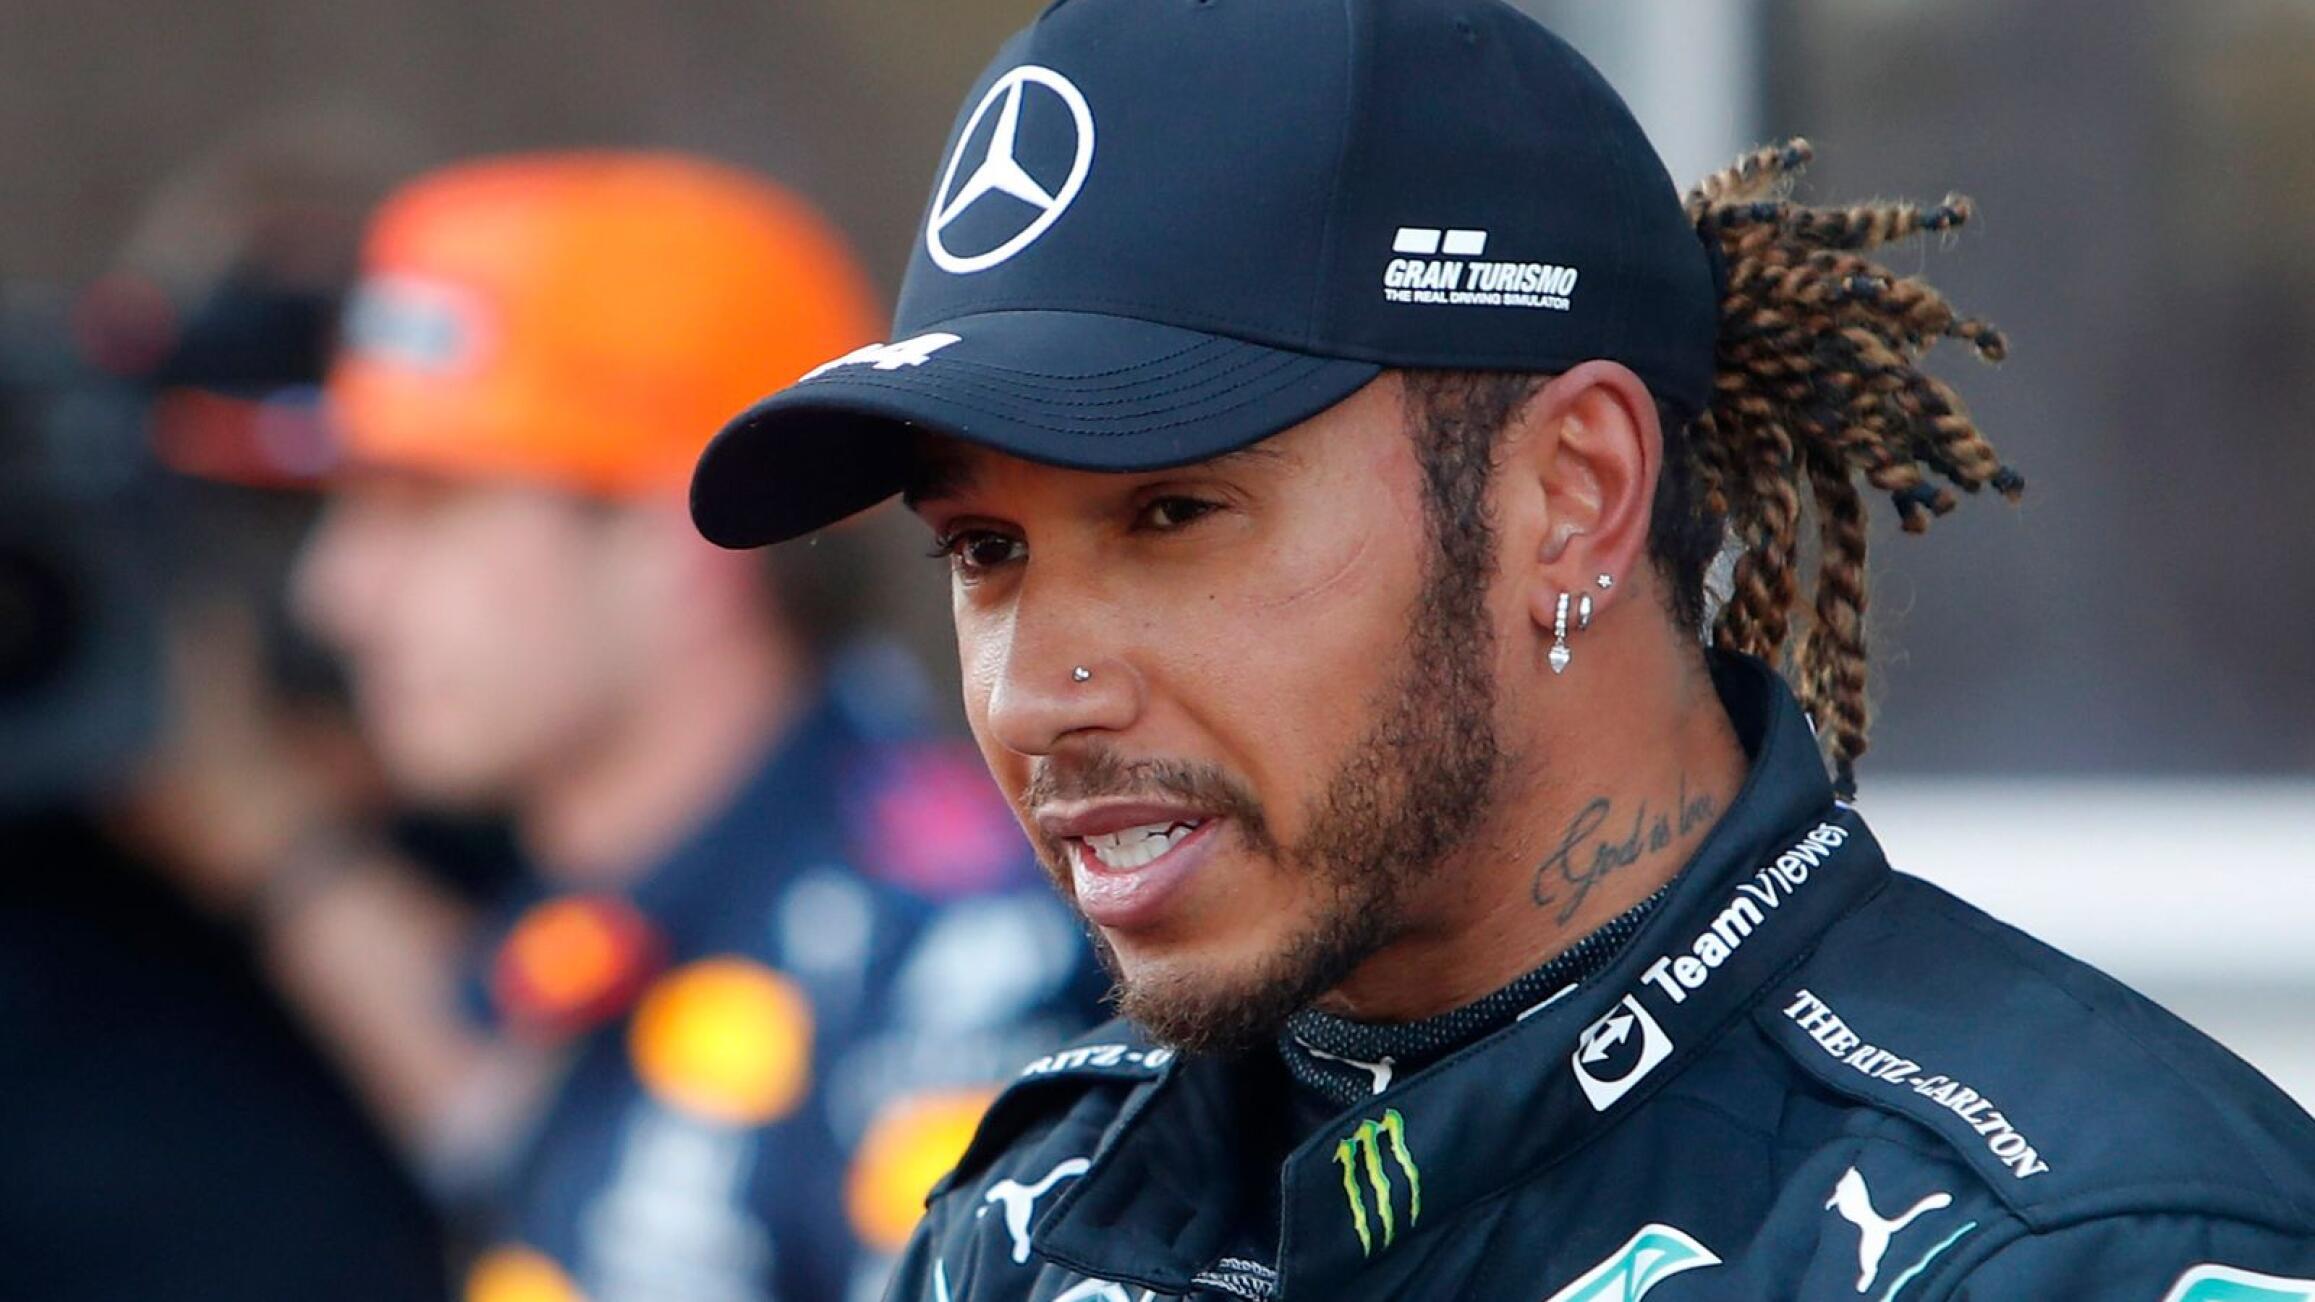 Mercedes' Lewis Hamilton reacts after qualifying in second position